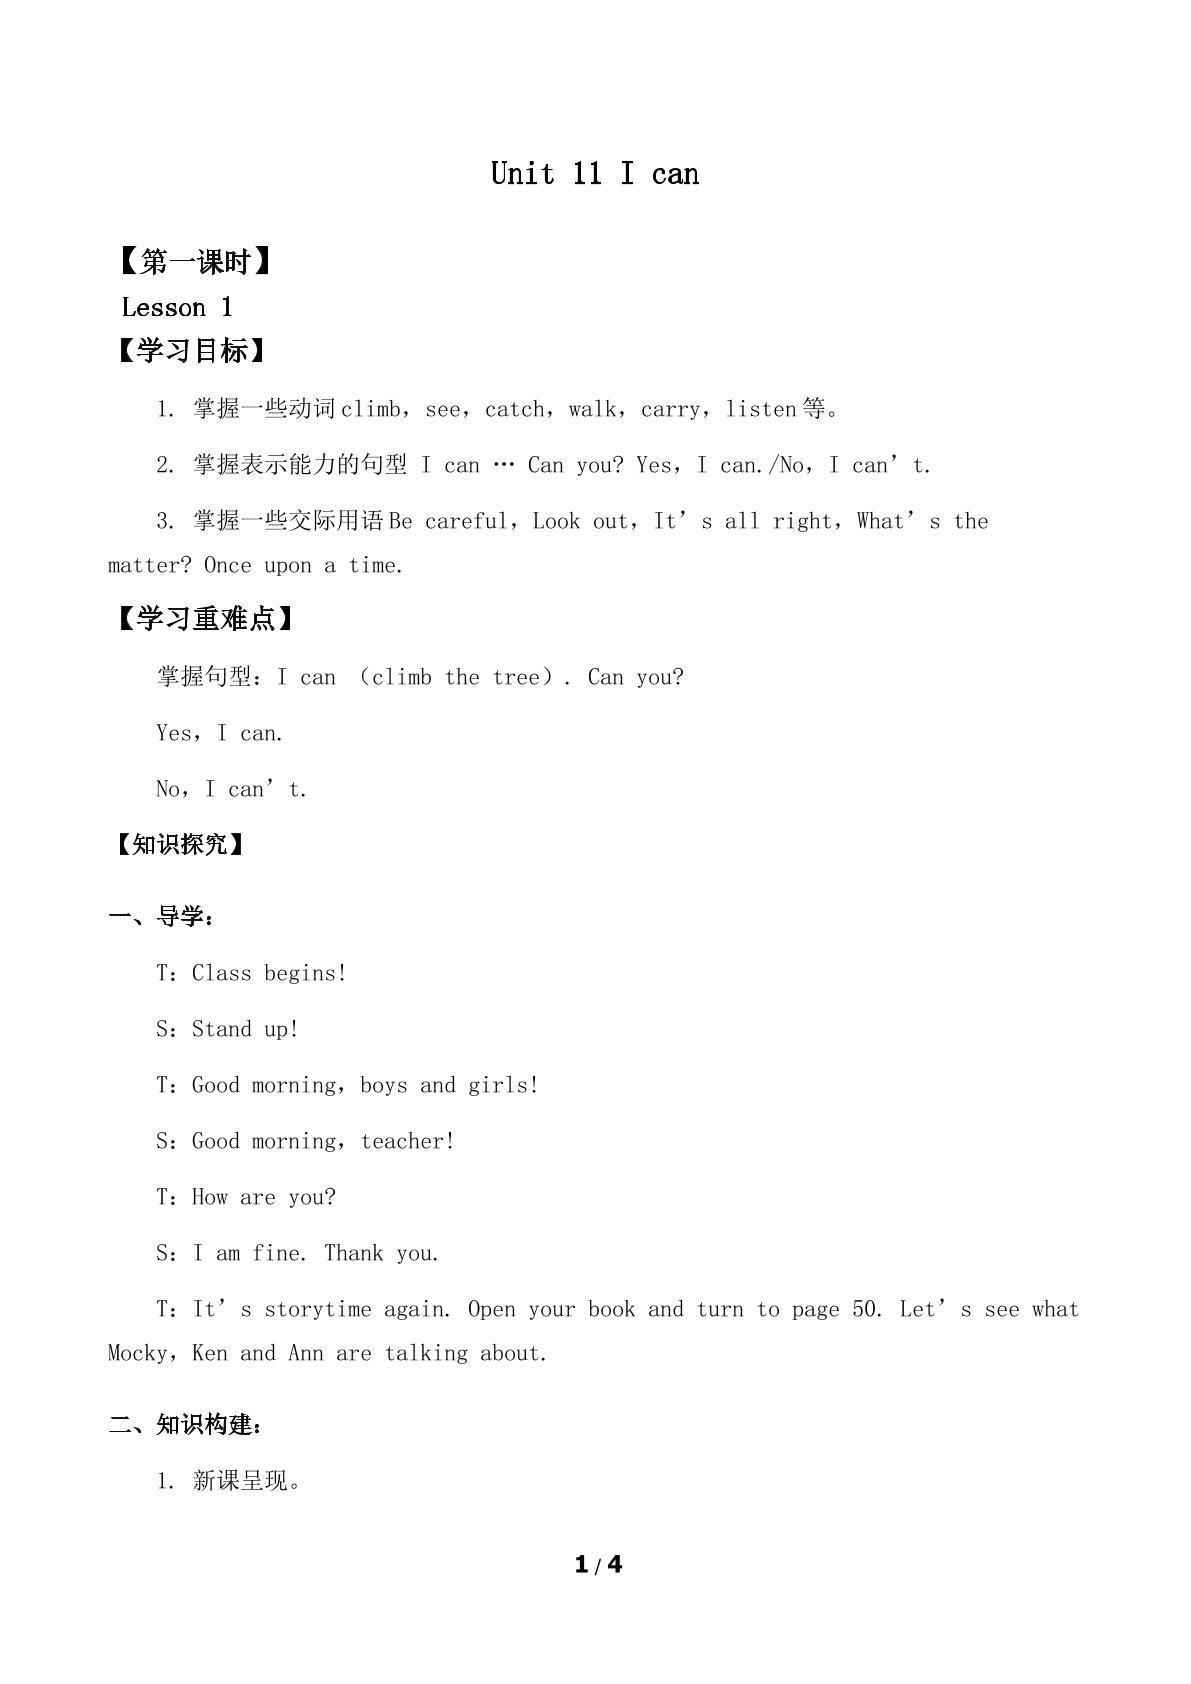 Unit 11 I can Lesson 1_学案1